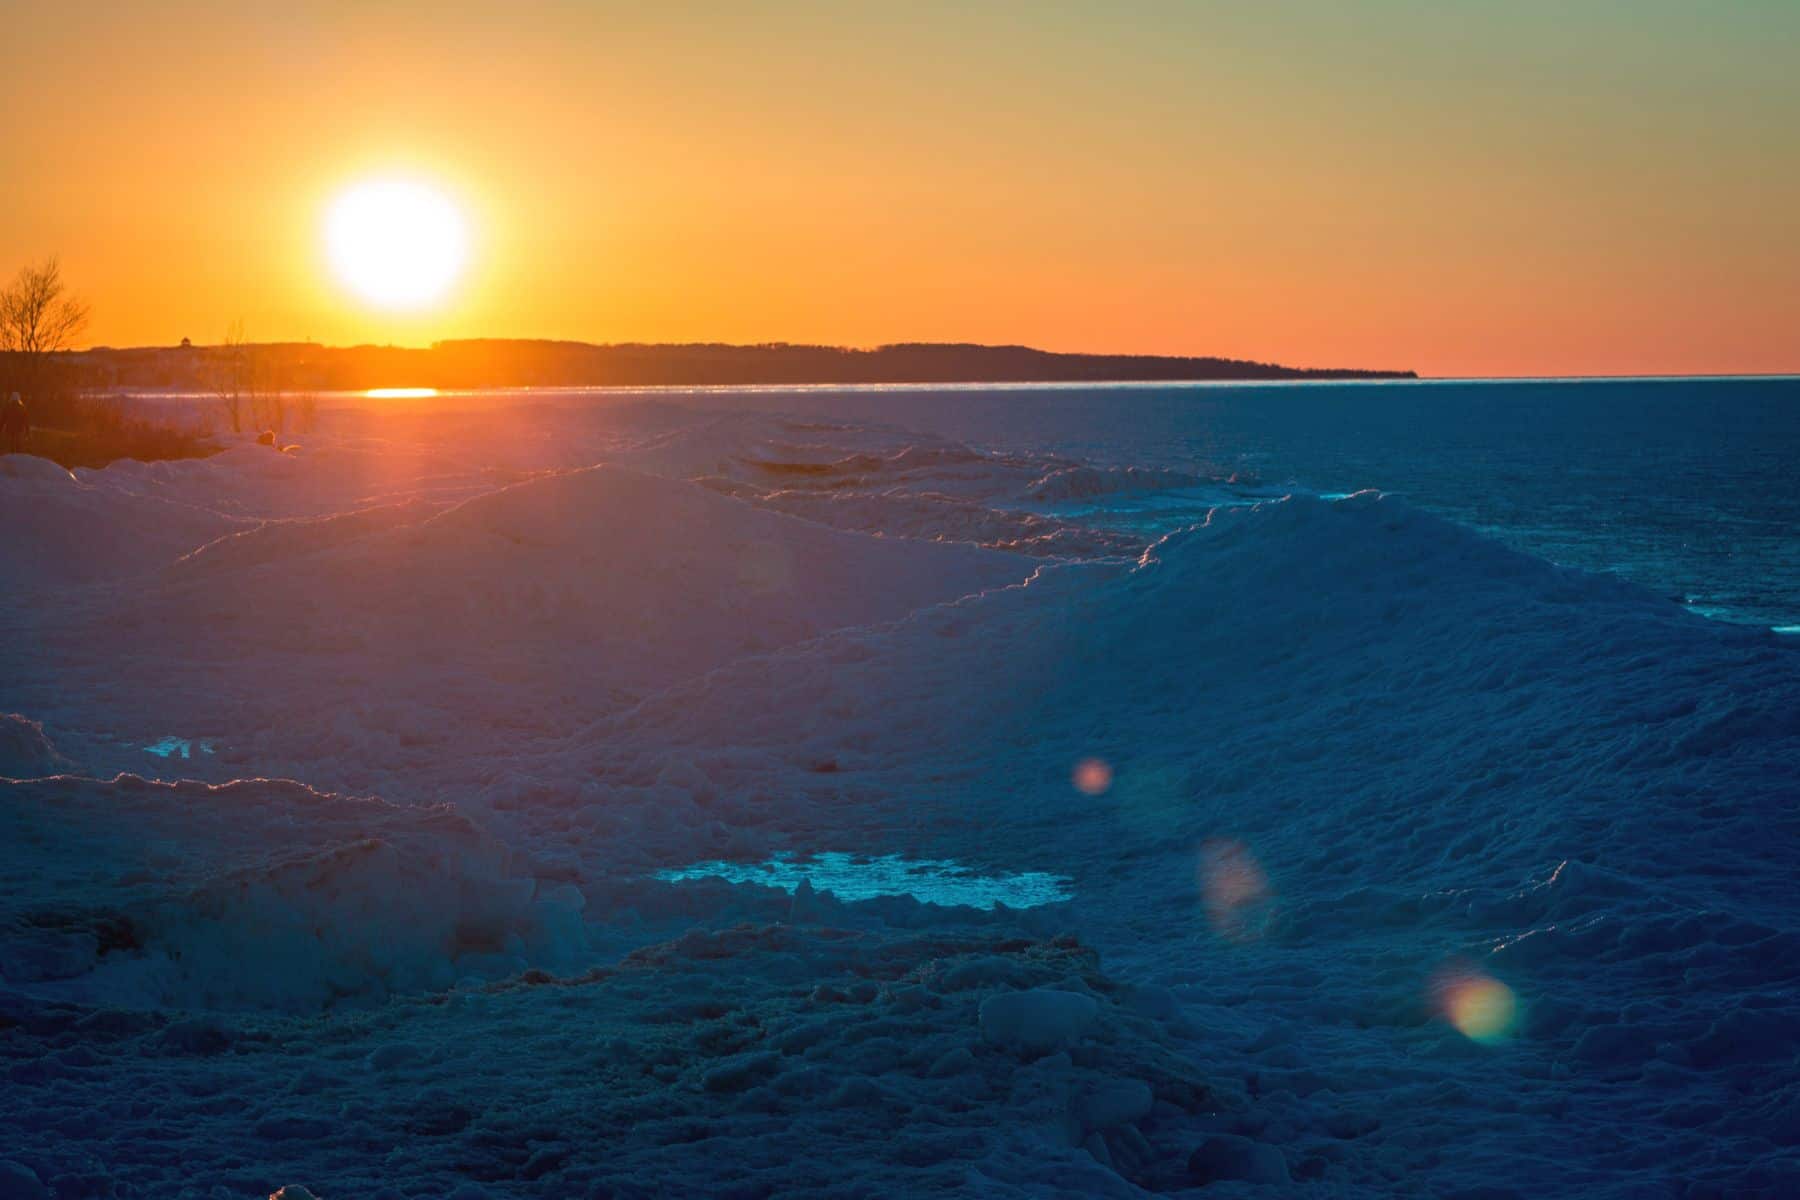 Lake Michigan at sunset in the winter.